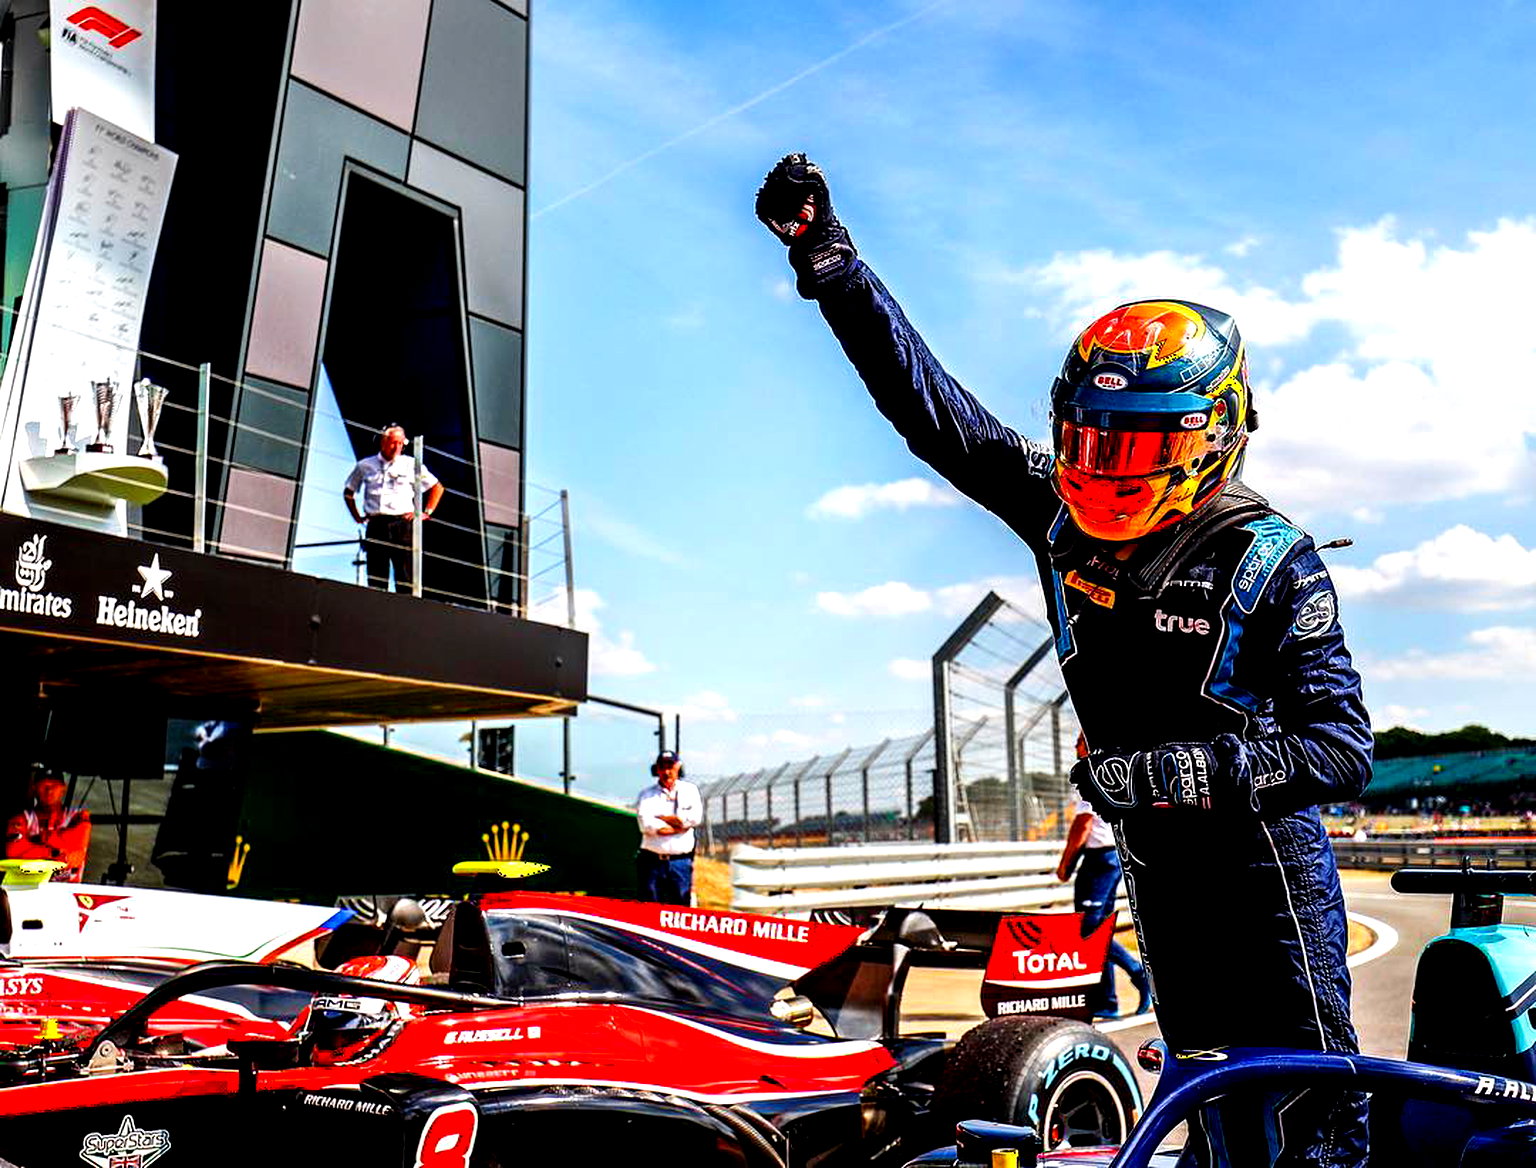 British-born Racer is the First Thai Formula One Driver in Almost 70 Years